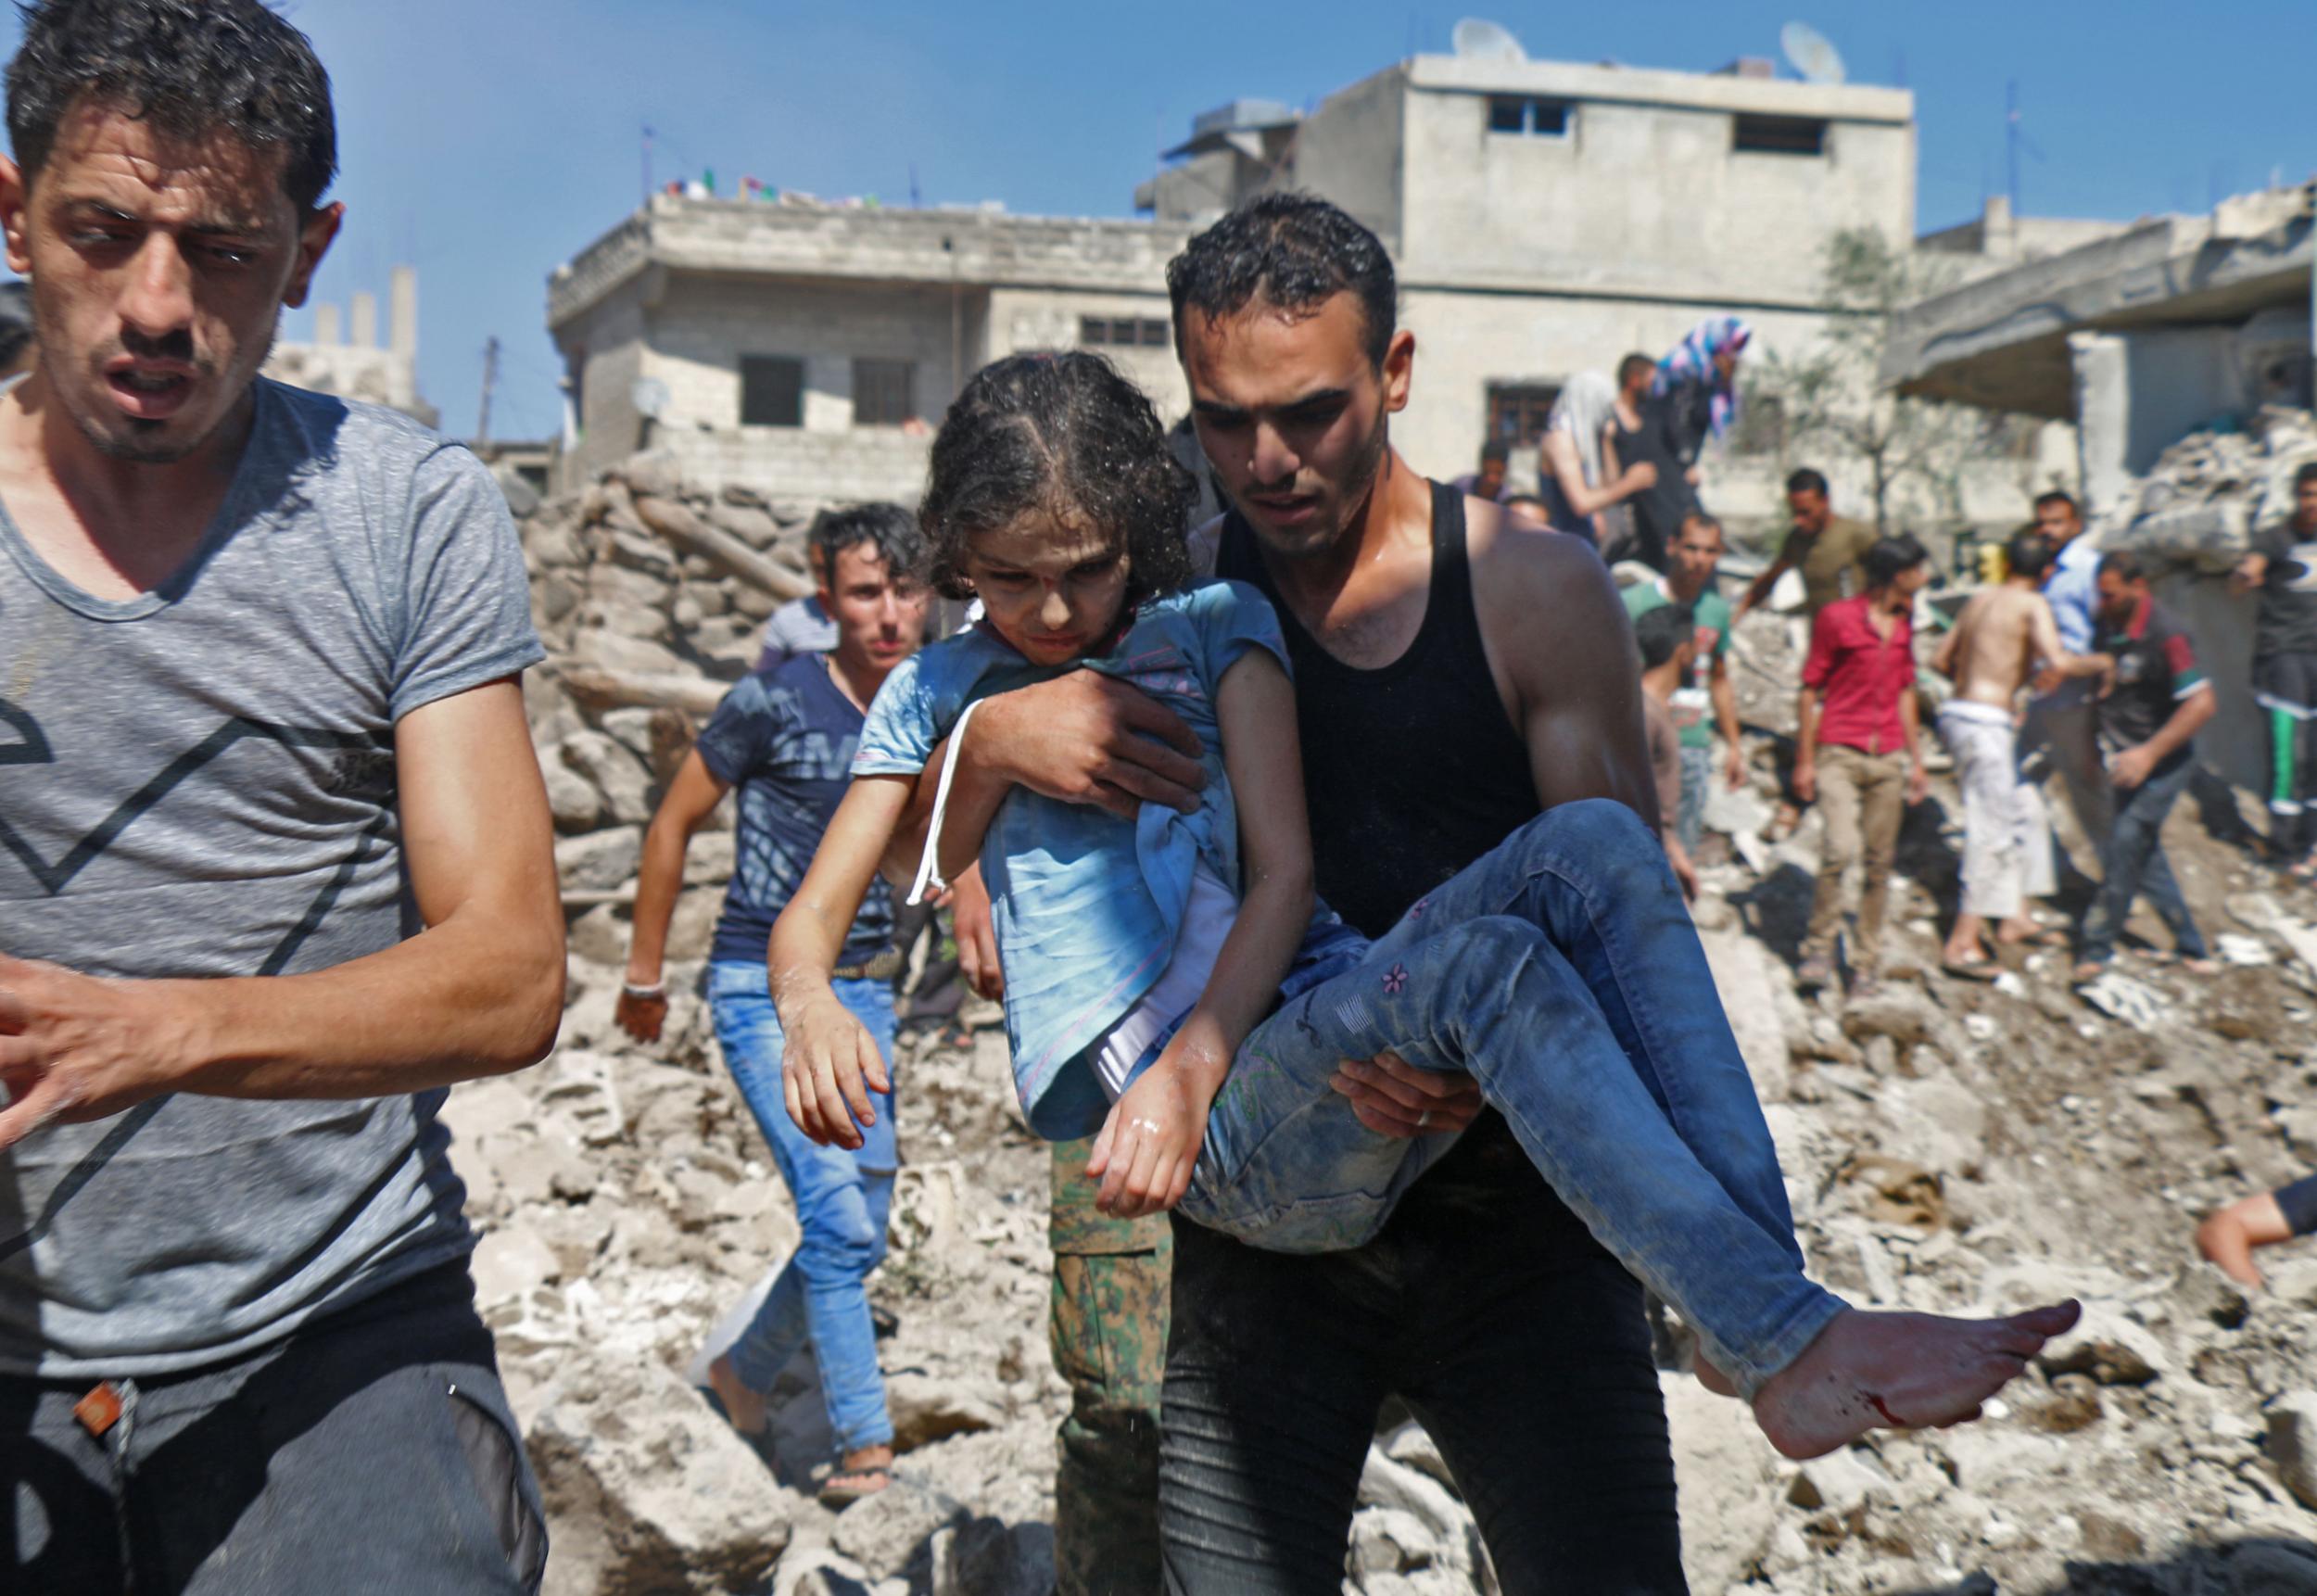 A man carries a child rescued from rubble after Syrian regime and Russian air strikes in the rebel-held town of Nawa, about 30 kilometres north of Daraa in southern Syria, on 26 June 2018